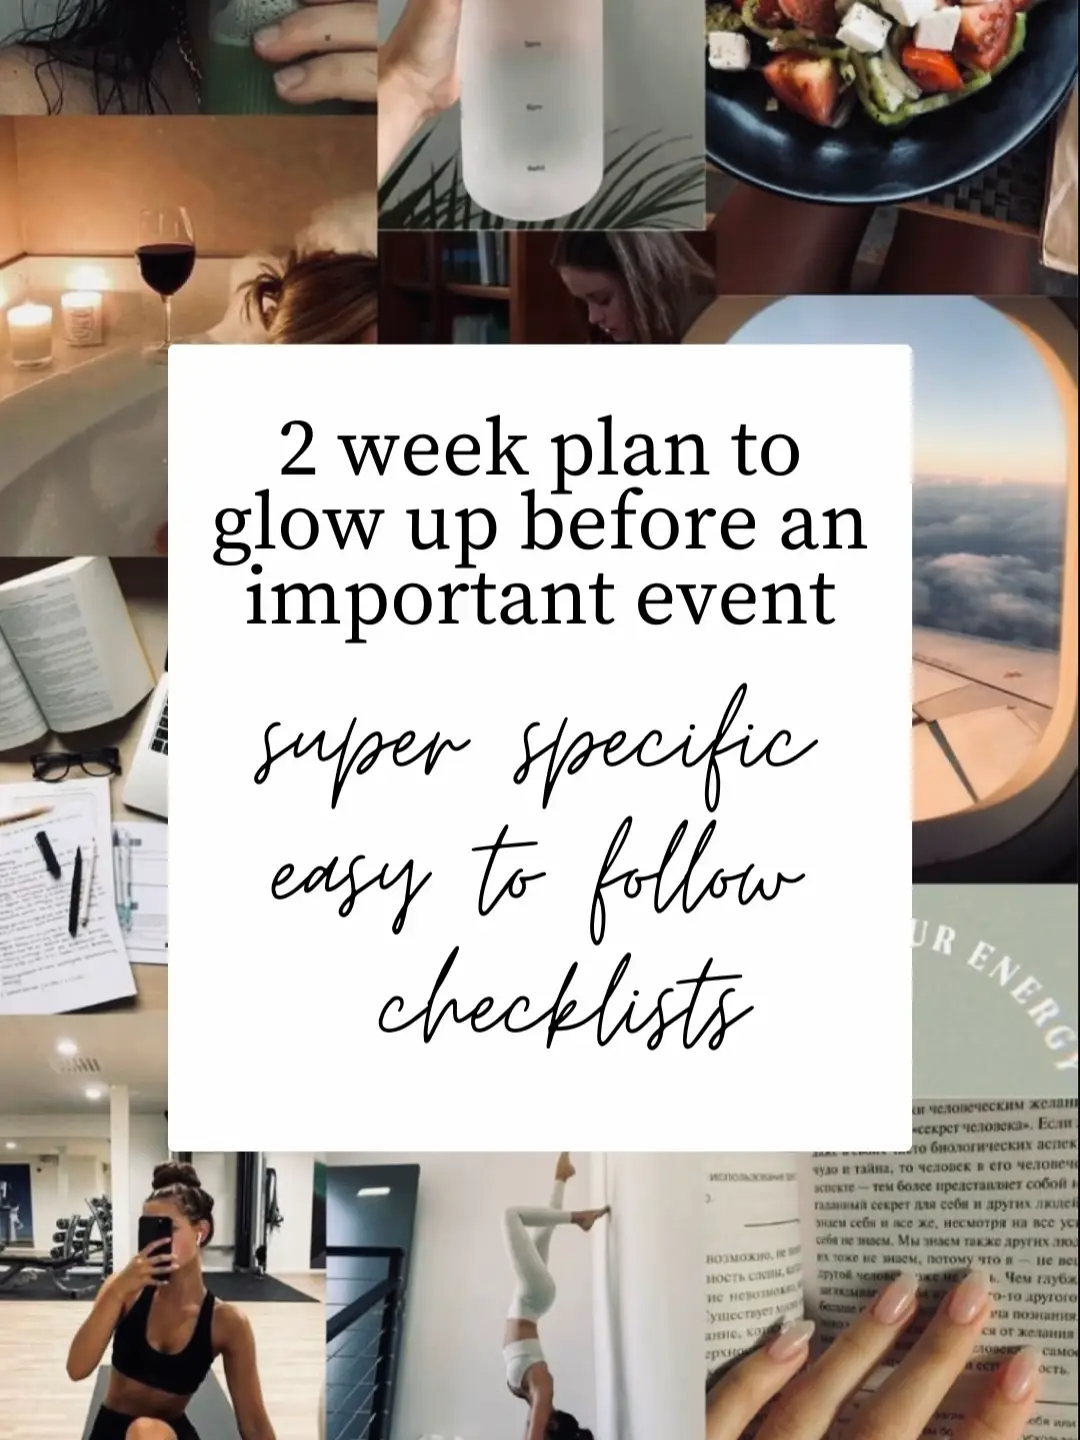 Physical Glow Up Plan: Simple, Realistic, & Works!'s images